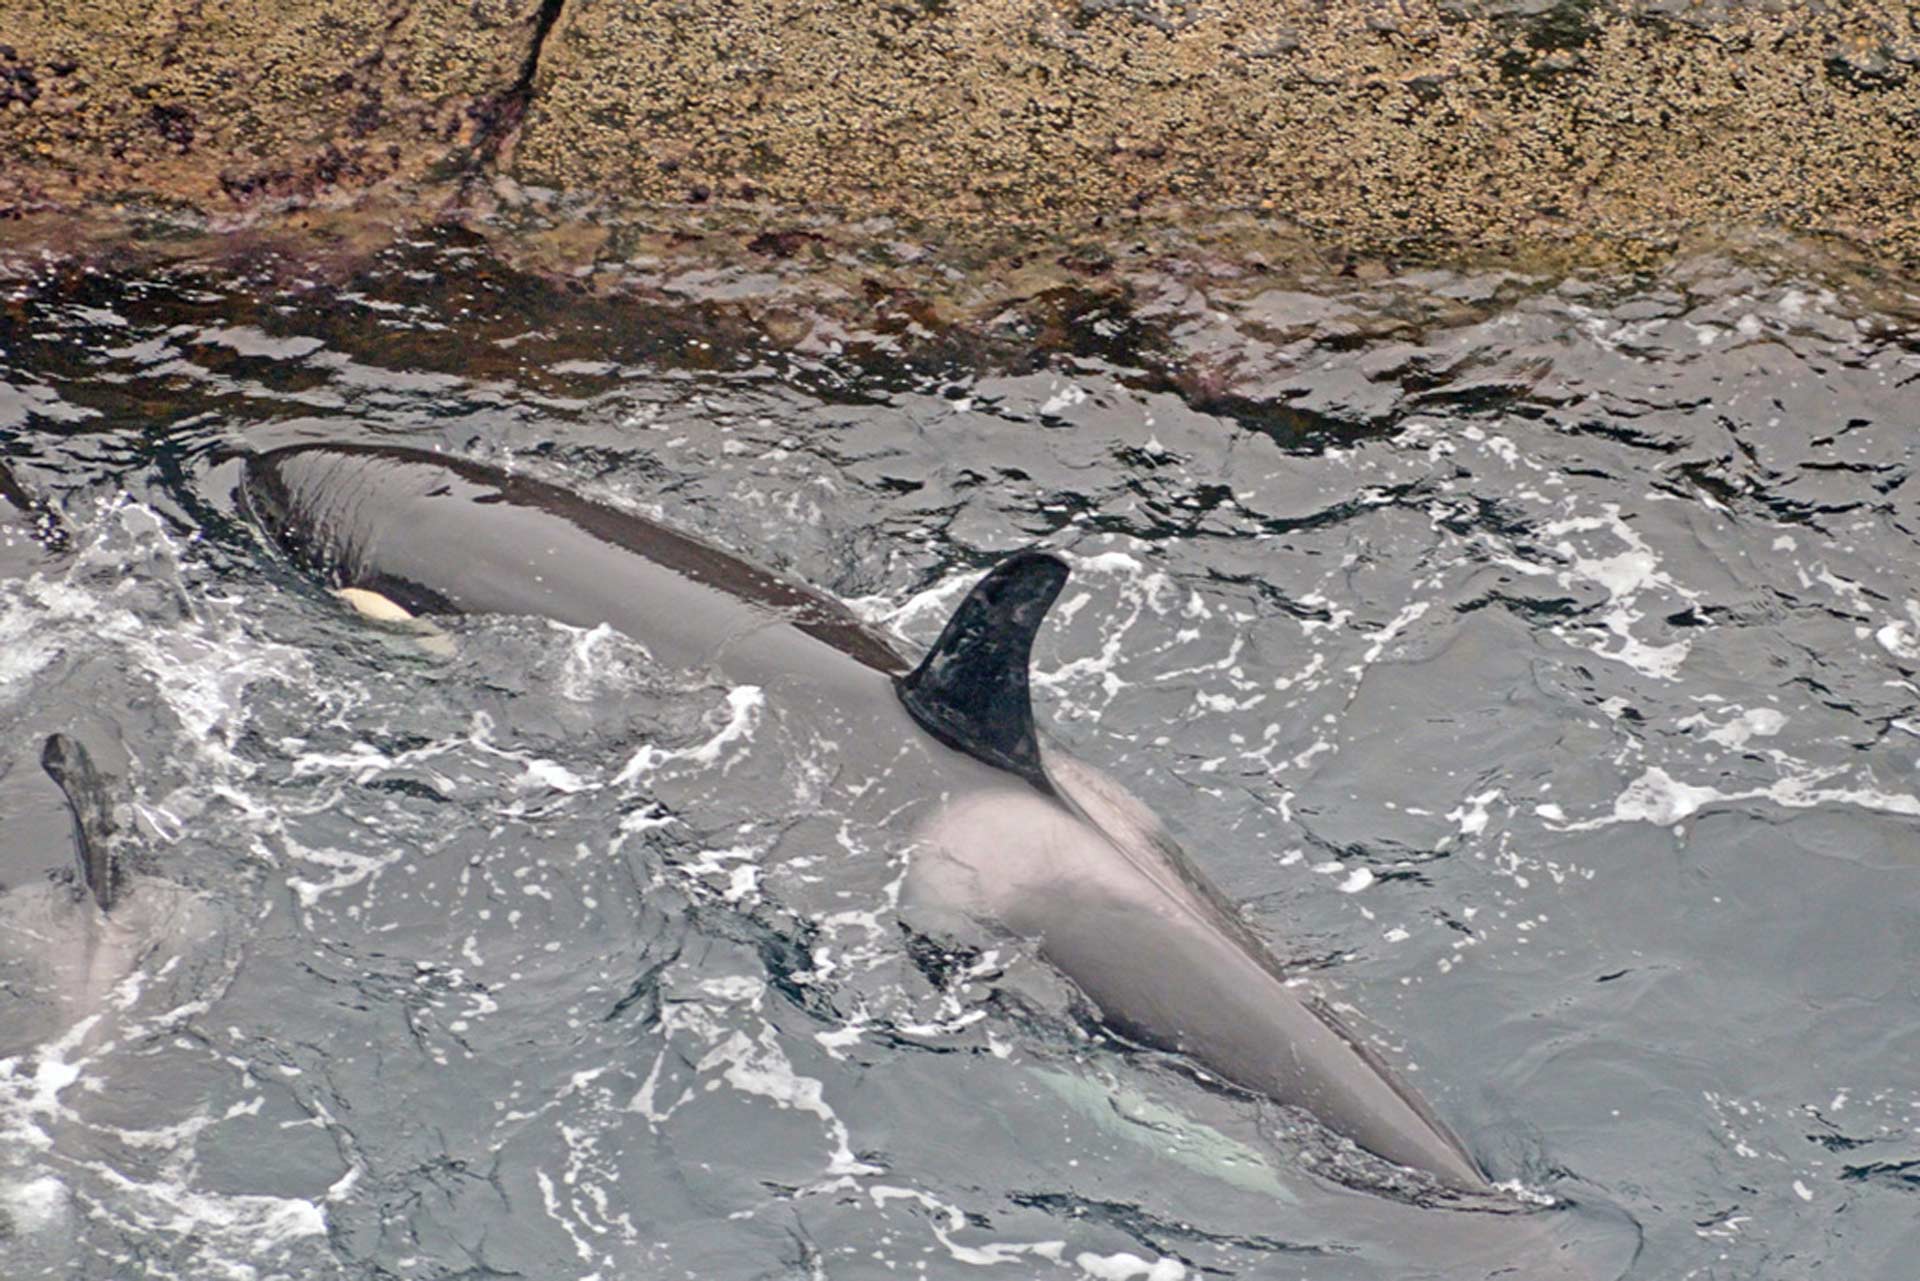 Picture taken Sept. 2012 by Planet Whale’s research team on the island of Suðuroy. This female orca has been identified and named as “Cristina.” Photo: Mark Hosford, Planet Whale